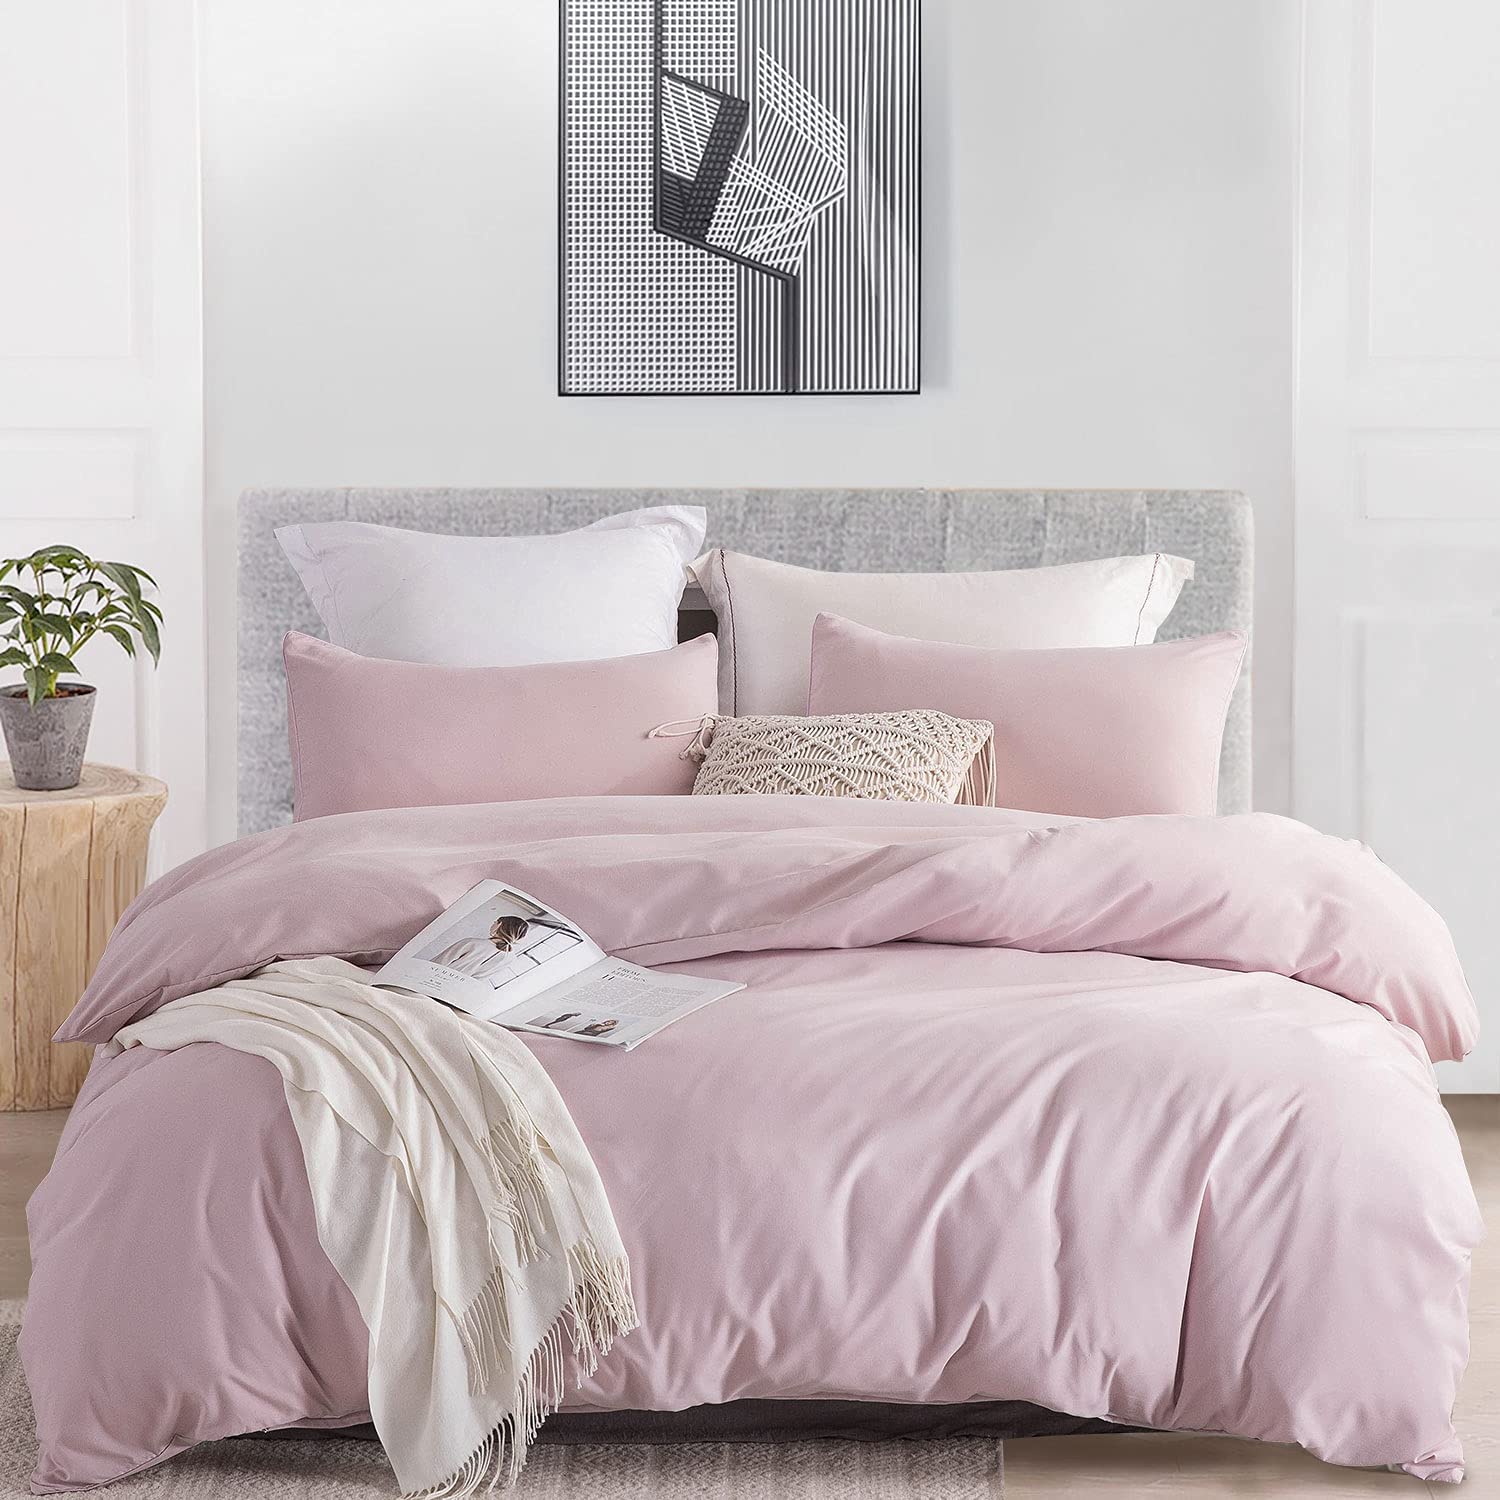 Price:$49.99  Duvet Cover Queen (1 Duvet Cover+2 Pillow Shams),Solid Color Soft and Breathable,100% Washed Microfiber,with Zipper Closure(Pink Mocha,Queen90 90"),No Comforter : Home & Kitchen